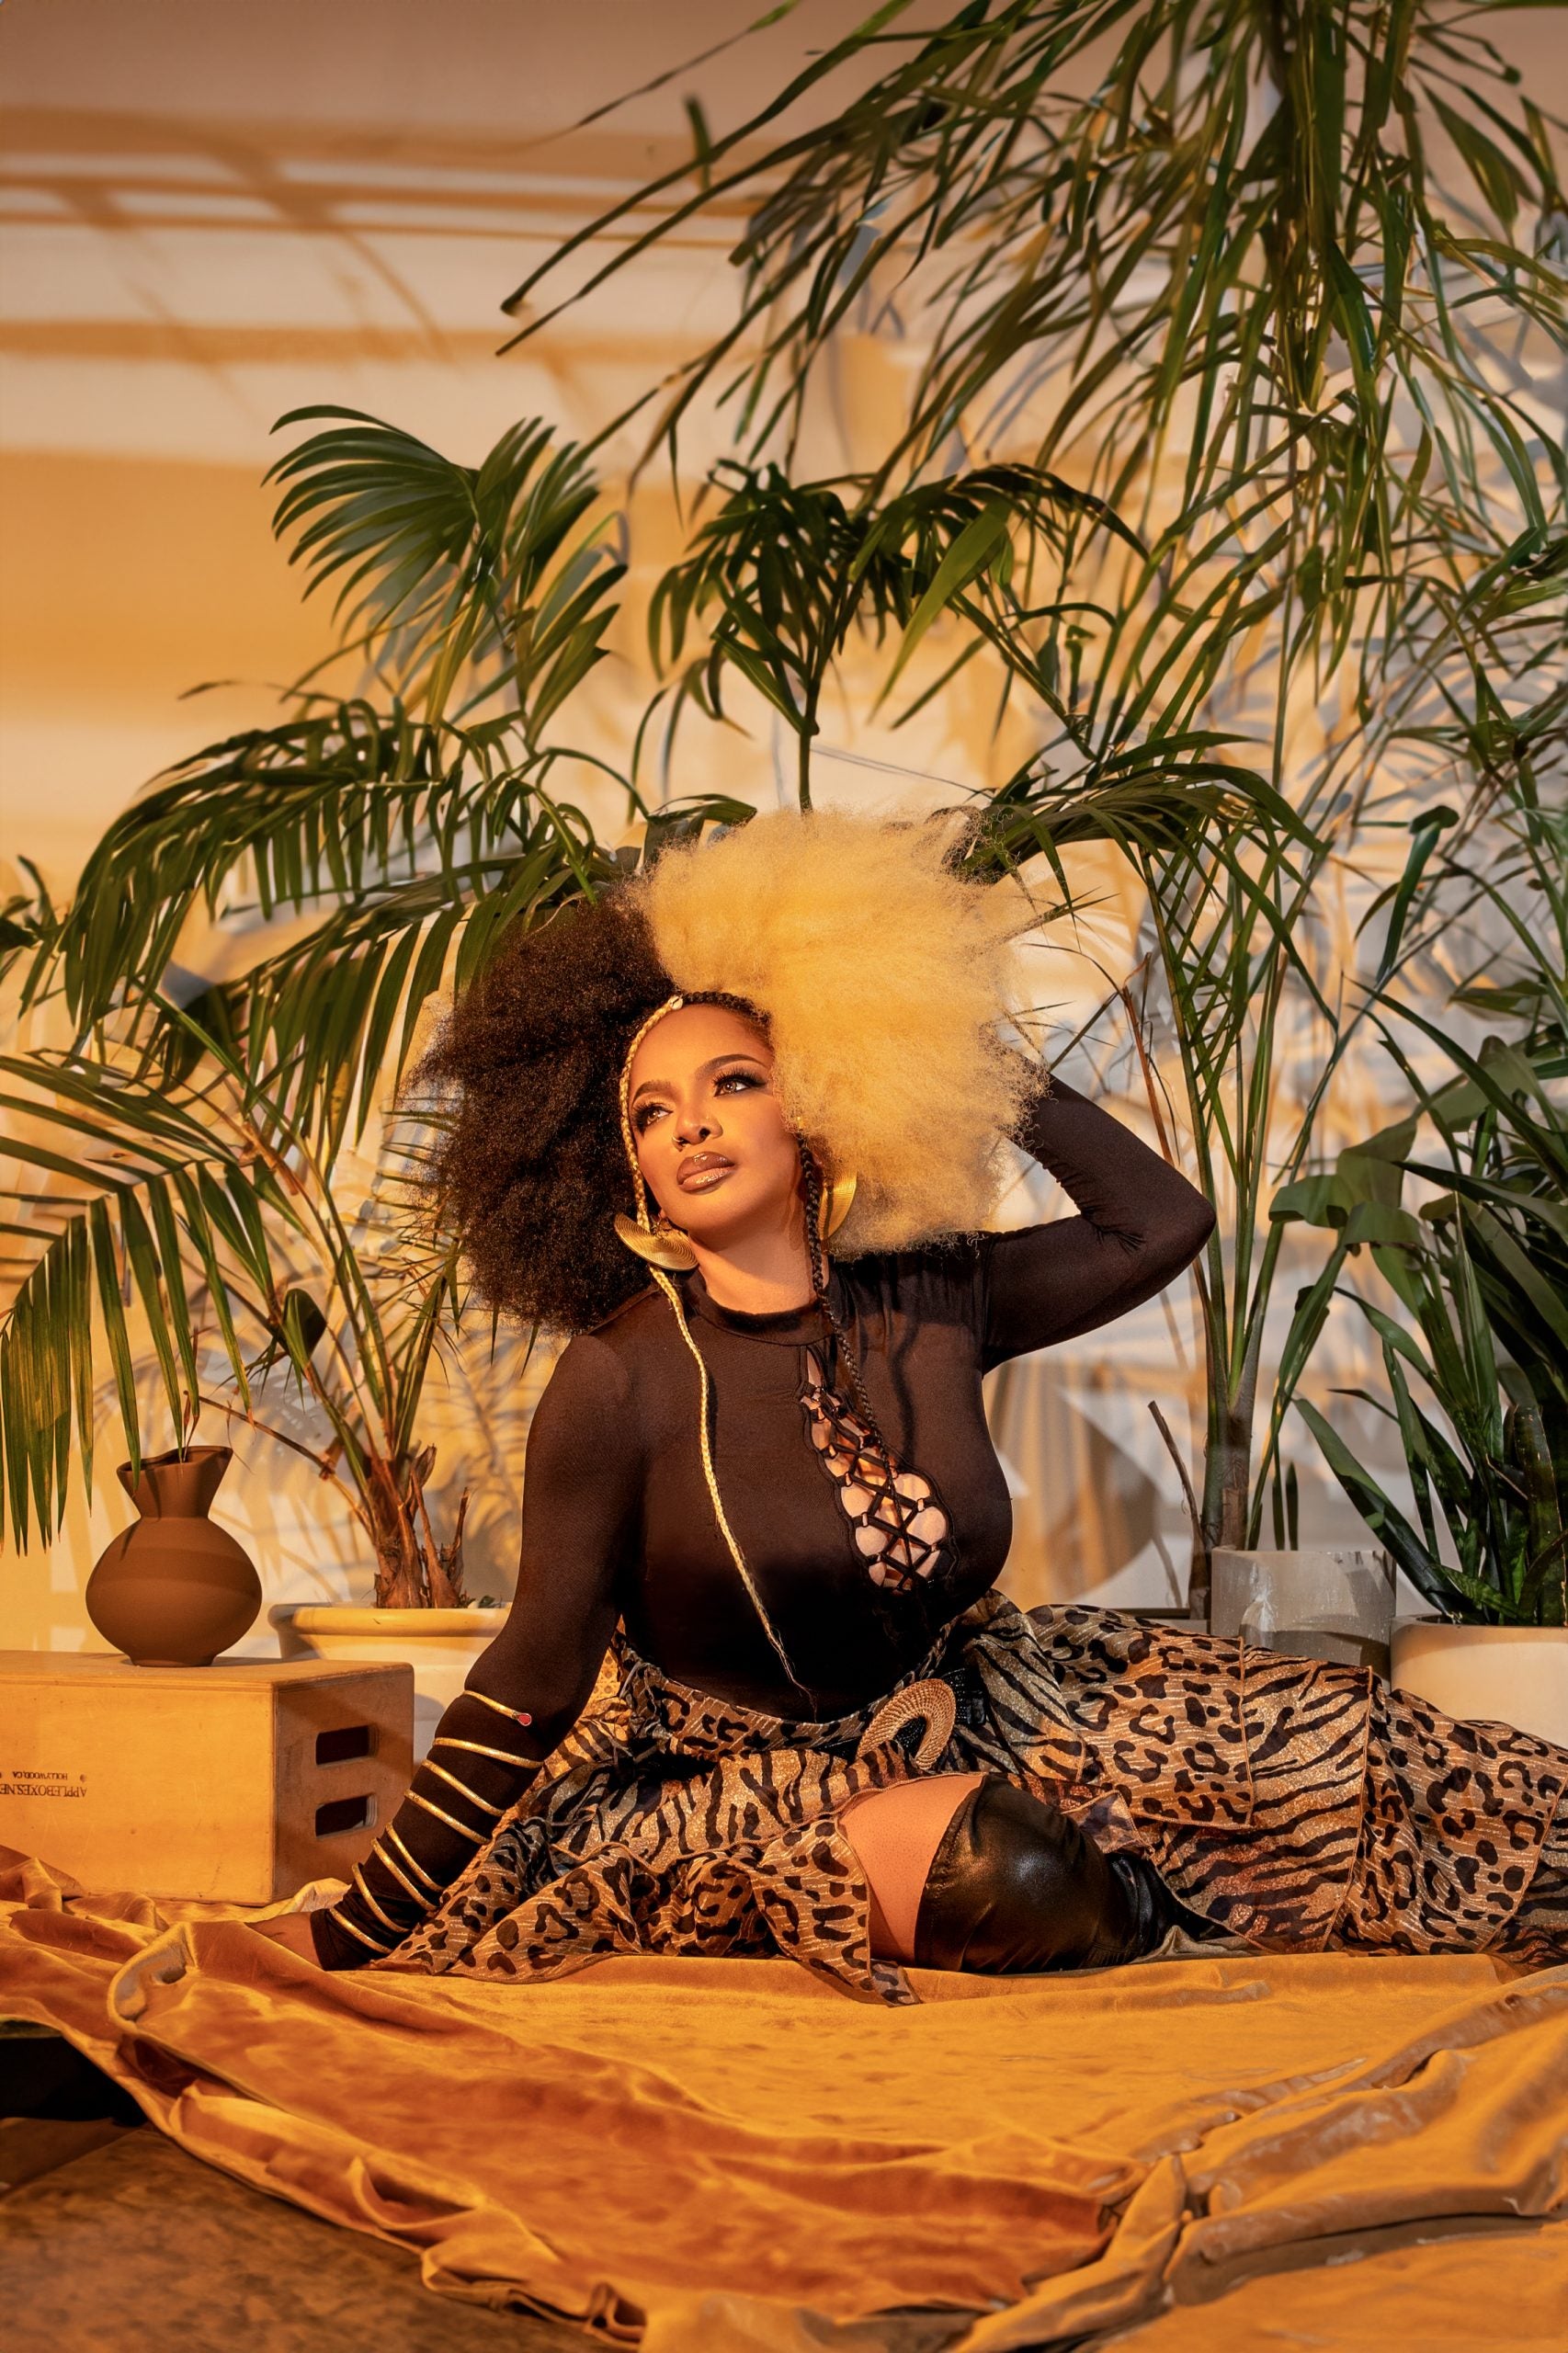 Leela James’ ‘Thought U Knew’ Album Infused With Soul